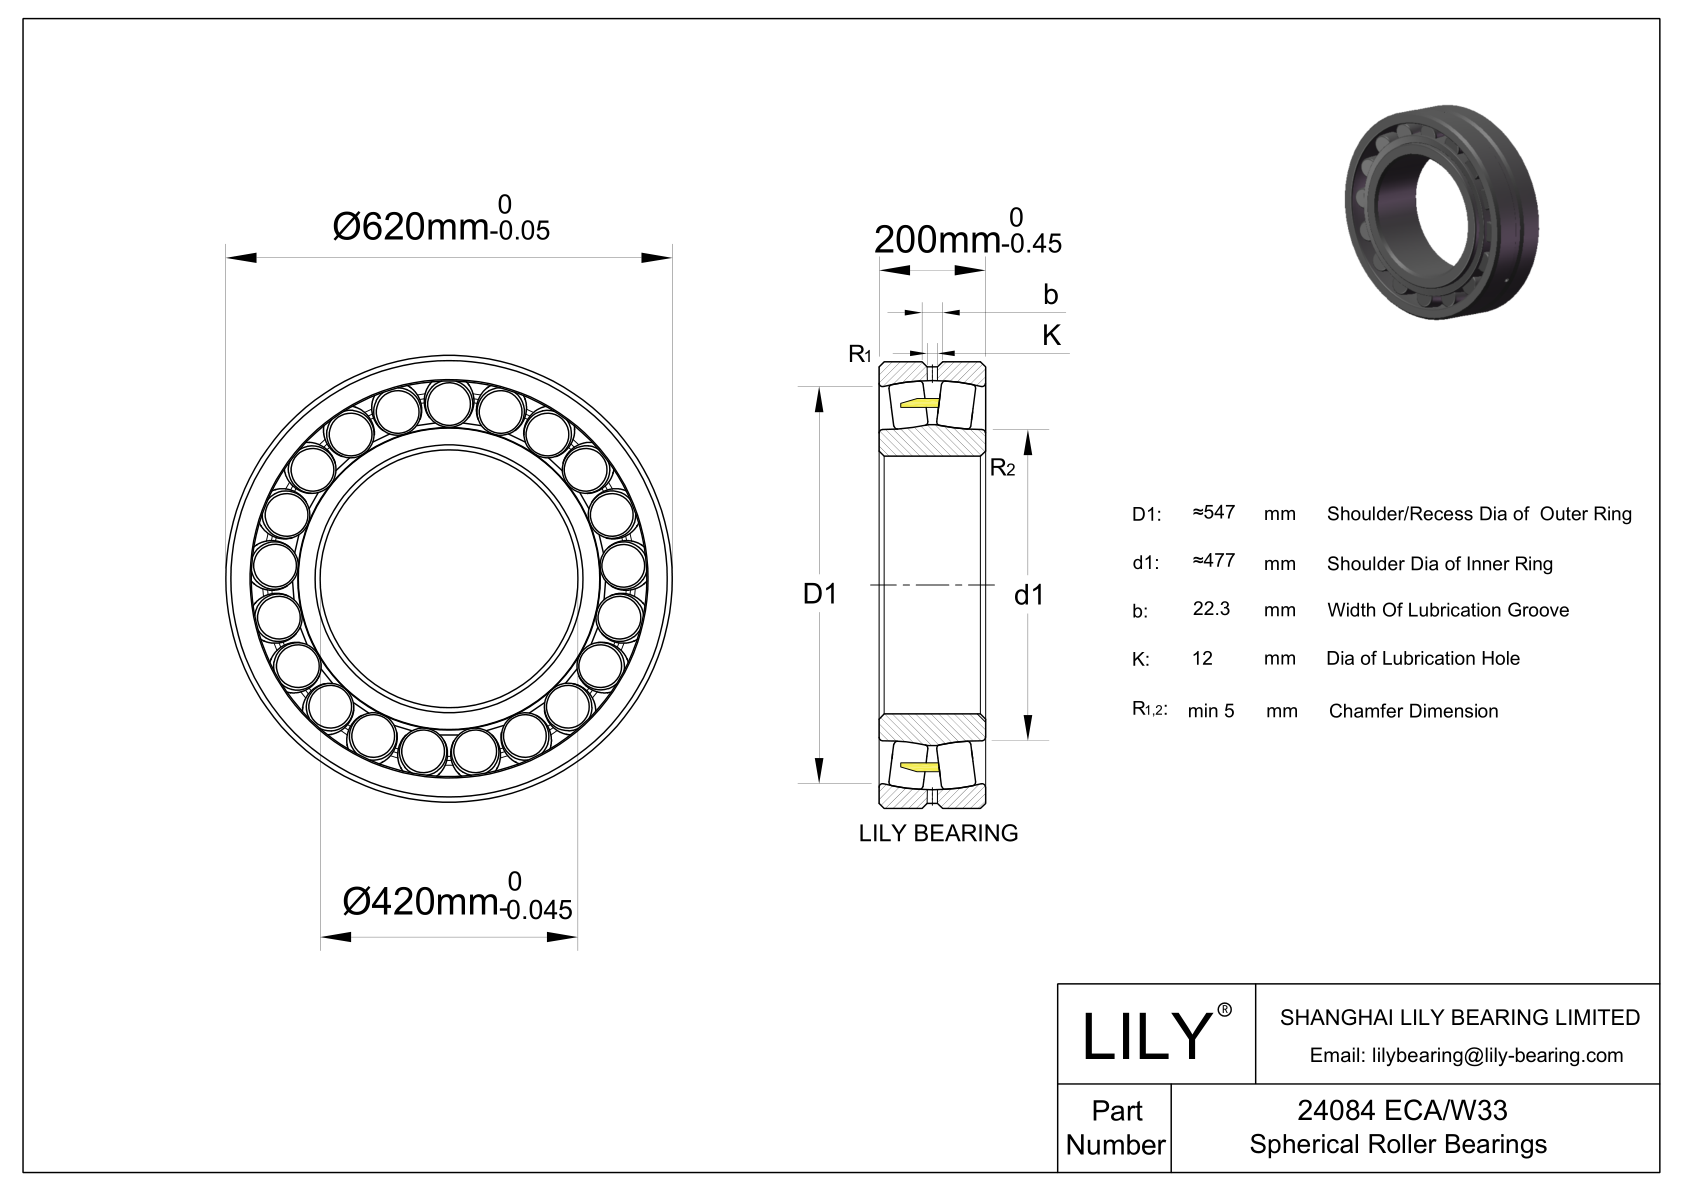 24084 ECA/W33 Double Row Spherical Roller Bearing cad drawing